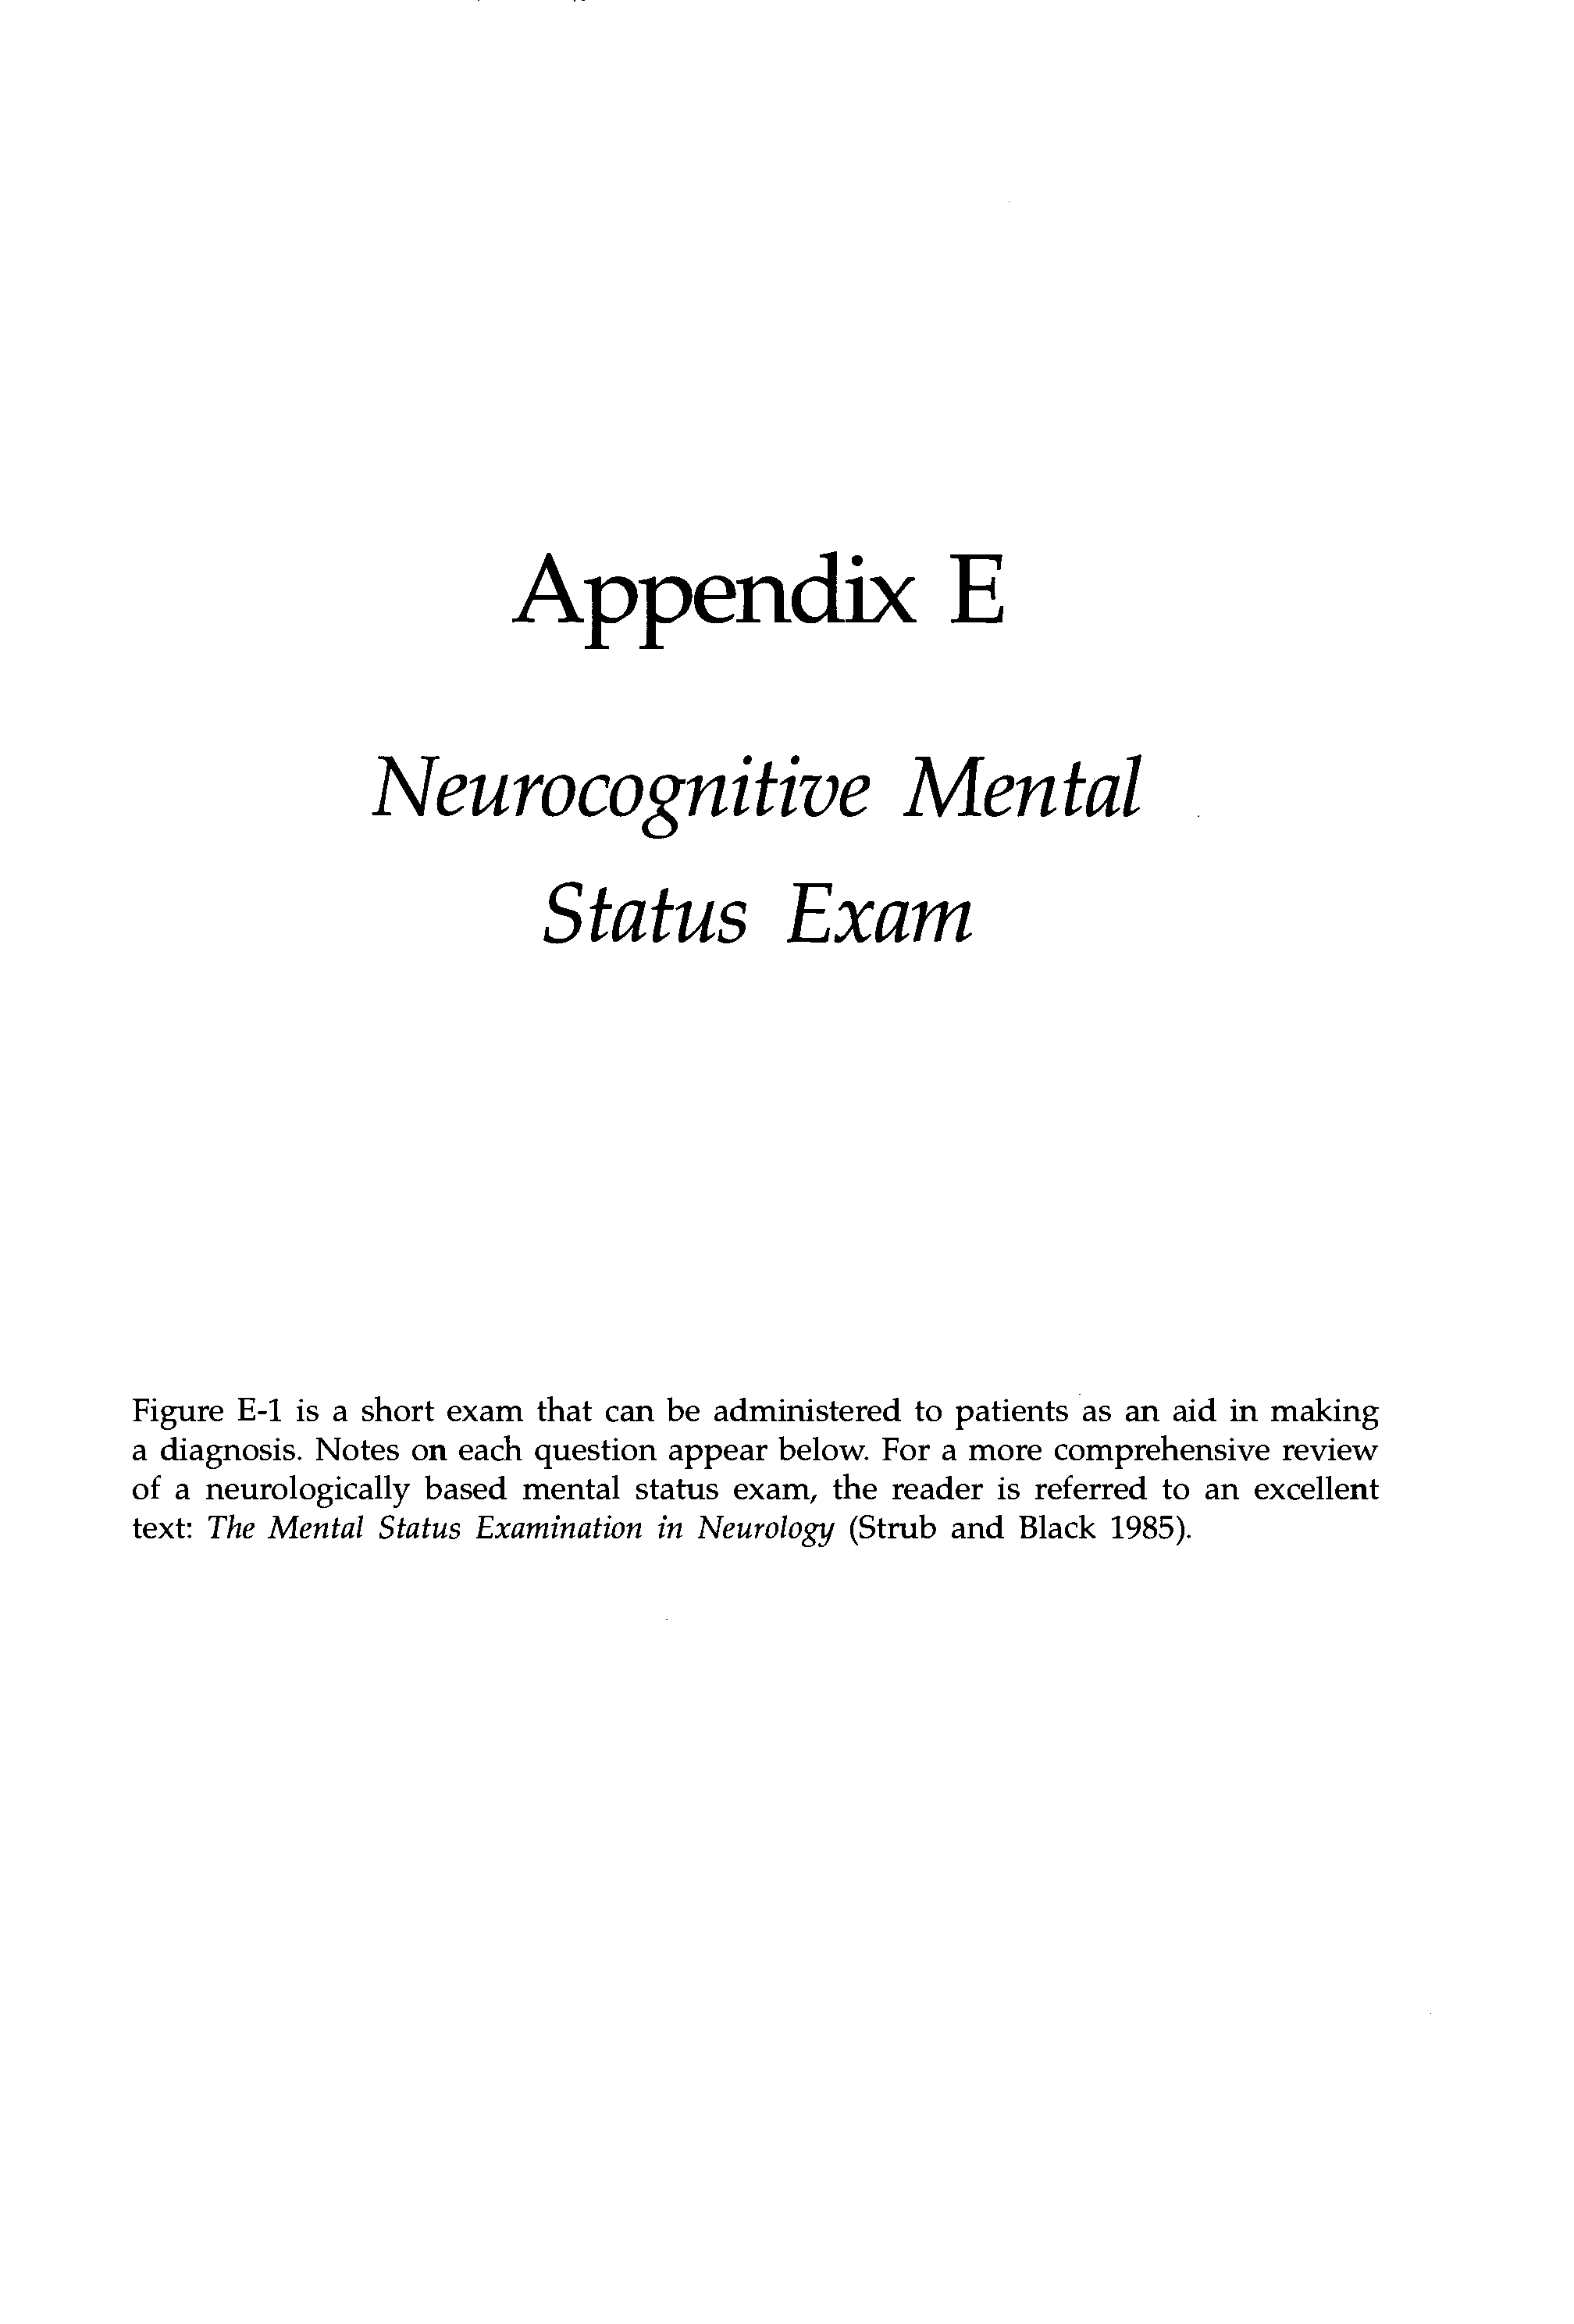 Figure E-1 is a short exam that can be administered to patients as an aid in making a diagnosis. Notes on each question appear below. For a more comprehensive review of a neurologically based mental status exam, the reader is referred to an excellent text The Mental Status Examination in Neurology (Strub and Black 1985).